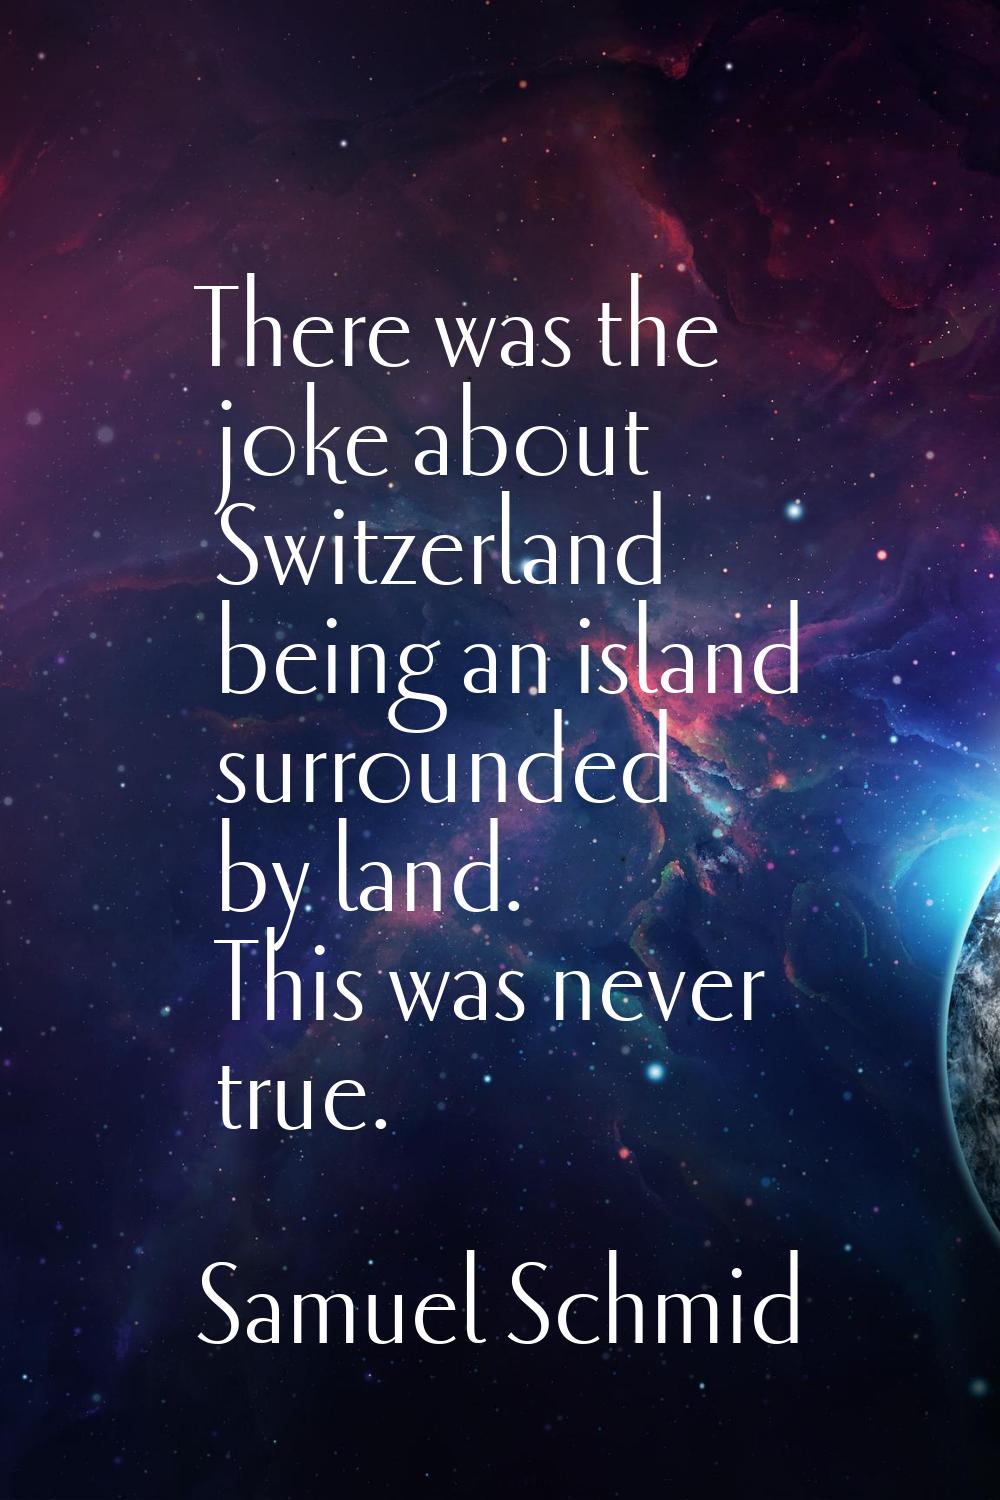 There was the joke about Switzerland being an island surrounded by land. This was never true.